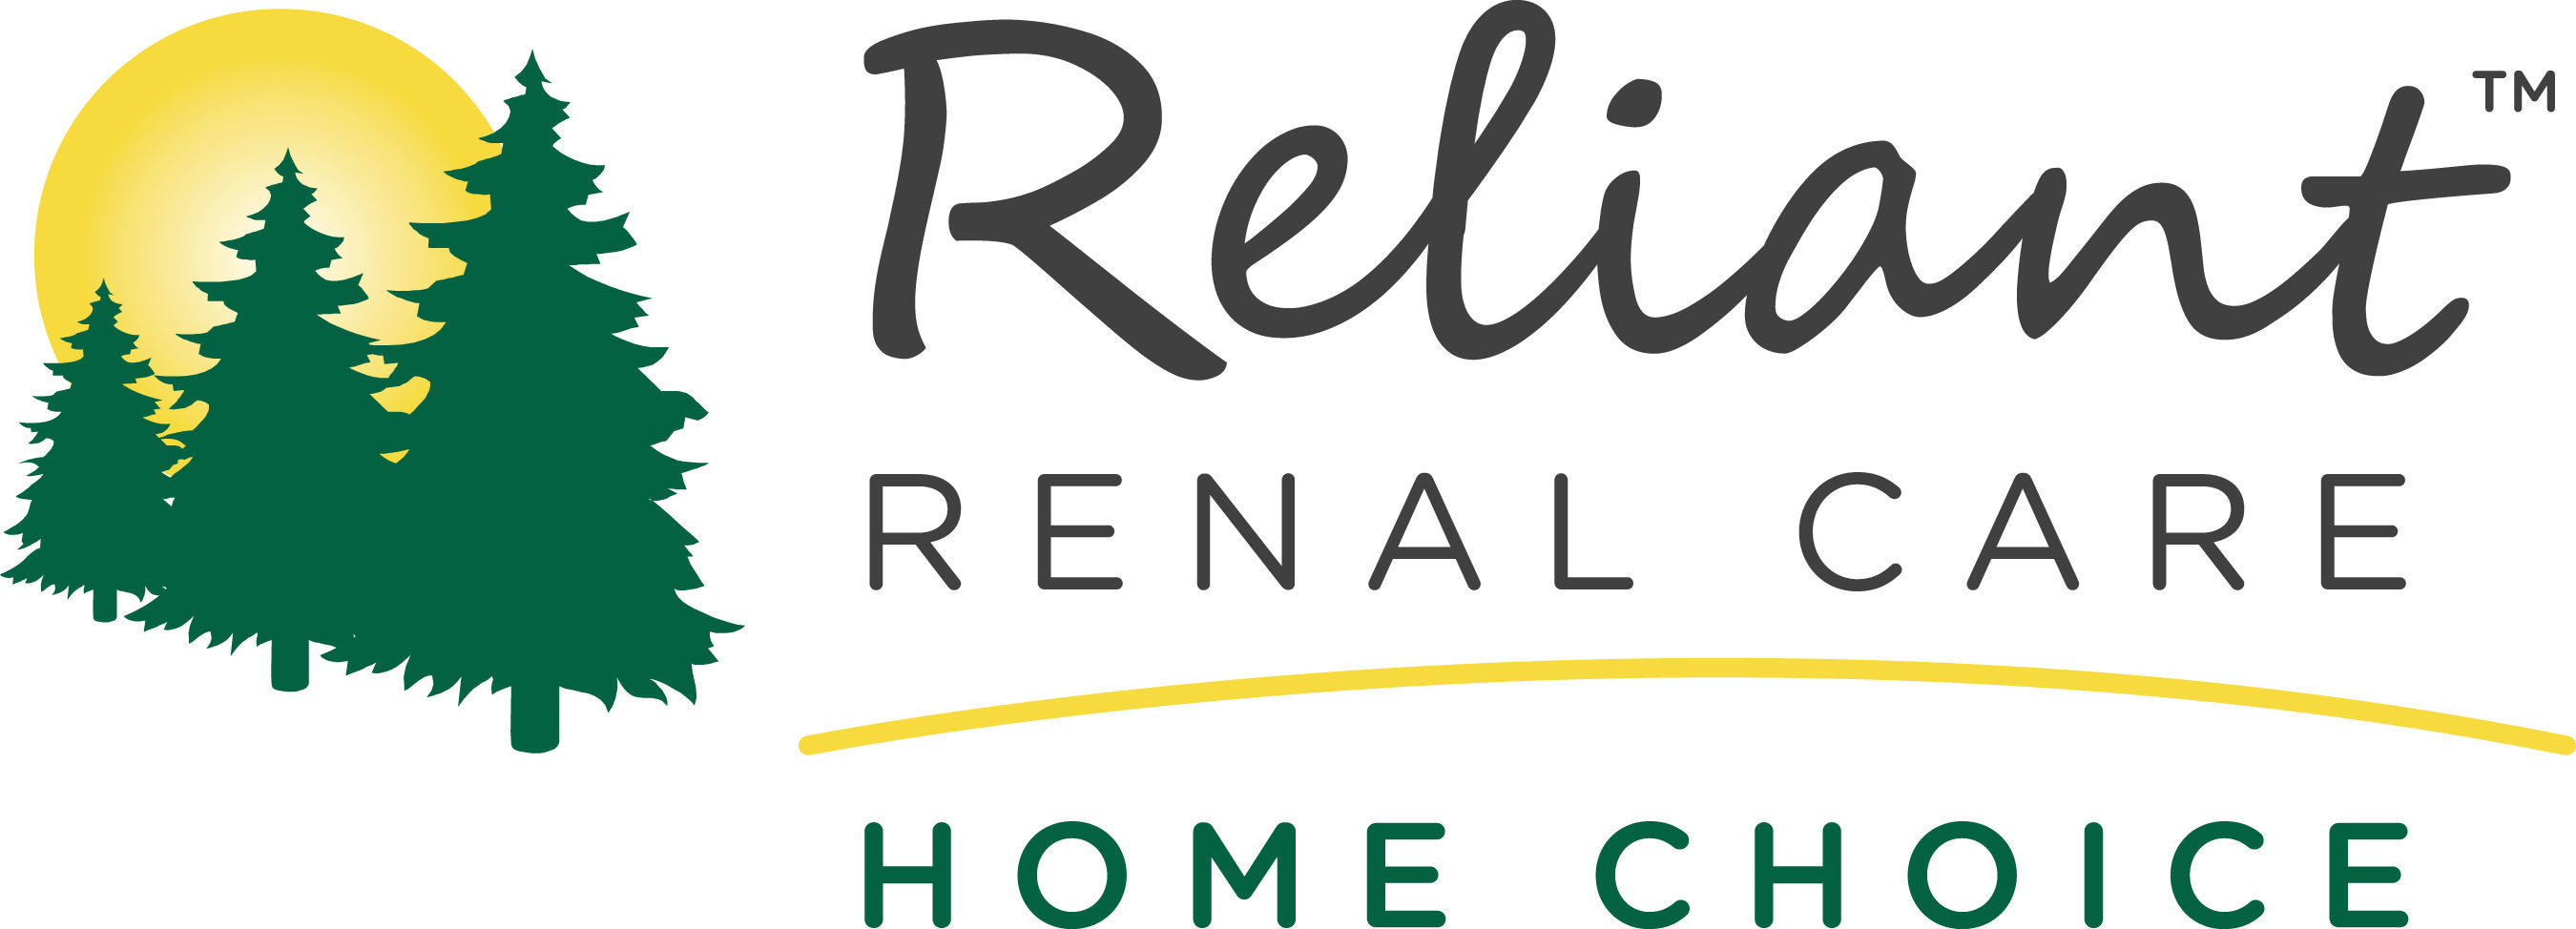 Reliant Renal Care is a company on a mission to provide dialysis patients a choice of treatments for dialysis. The treatment option selected by a patient is one of the most central decisions to how a patient elects to live day to day with renal disease. Reliant operates centers in 6 states (PA, MI, TX, LA, AL, GA) and provides conventional hemodialysis in-center, acute care, home HHD and PD training, and has recently expanded services to include staff assisted home hemodialysis within skilled nursing and rehabilitation facilities. Reliant Renal Care is the Right Choice for high quality, compassionate Dialysis services.